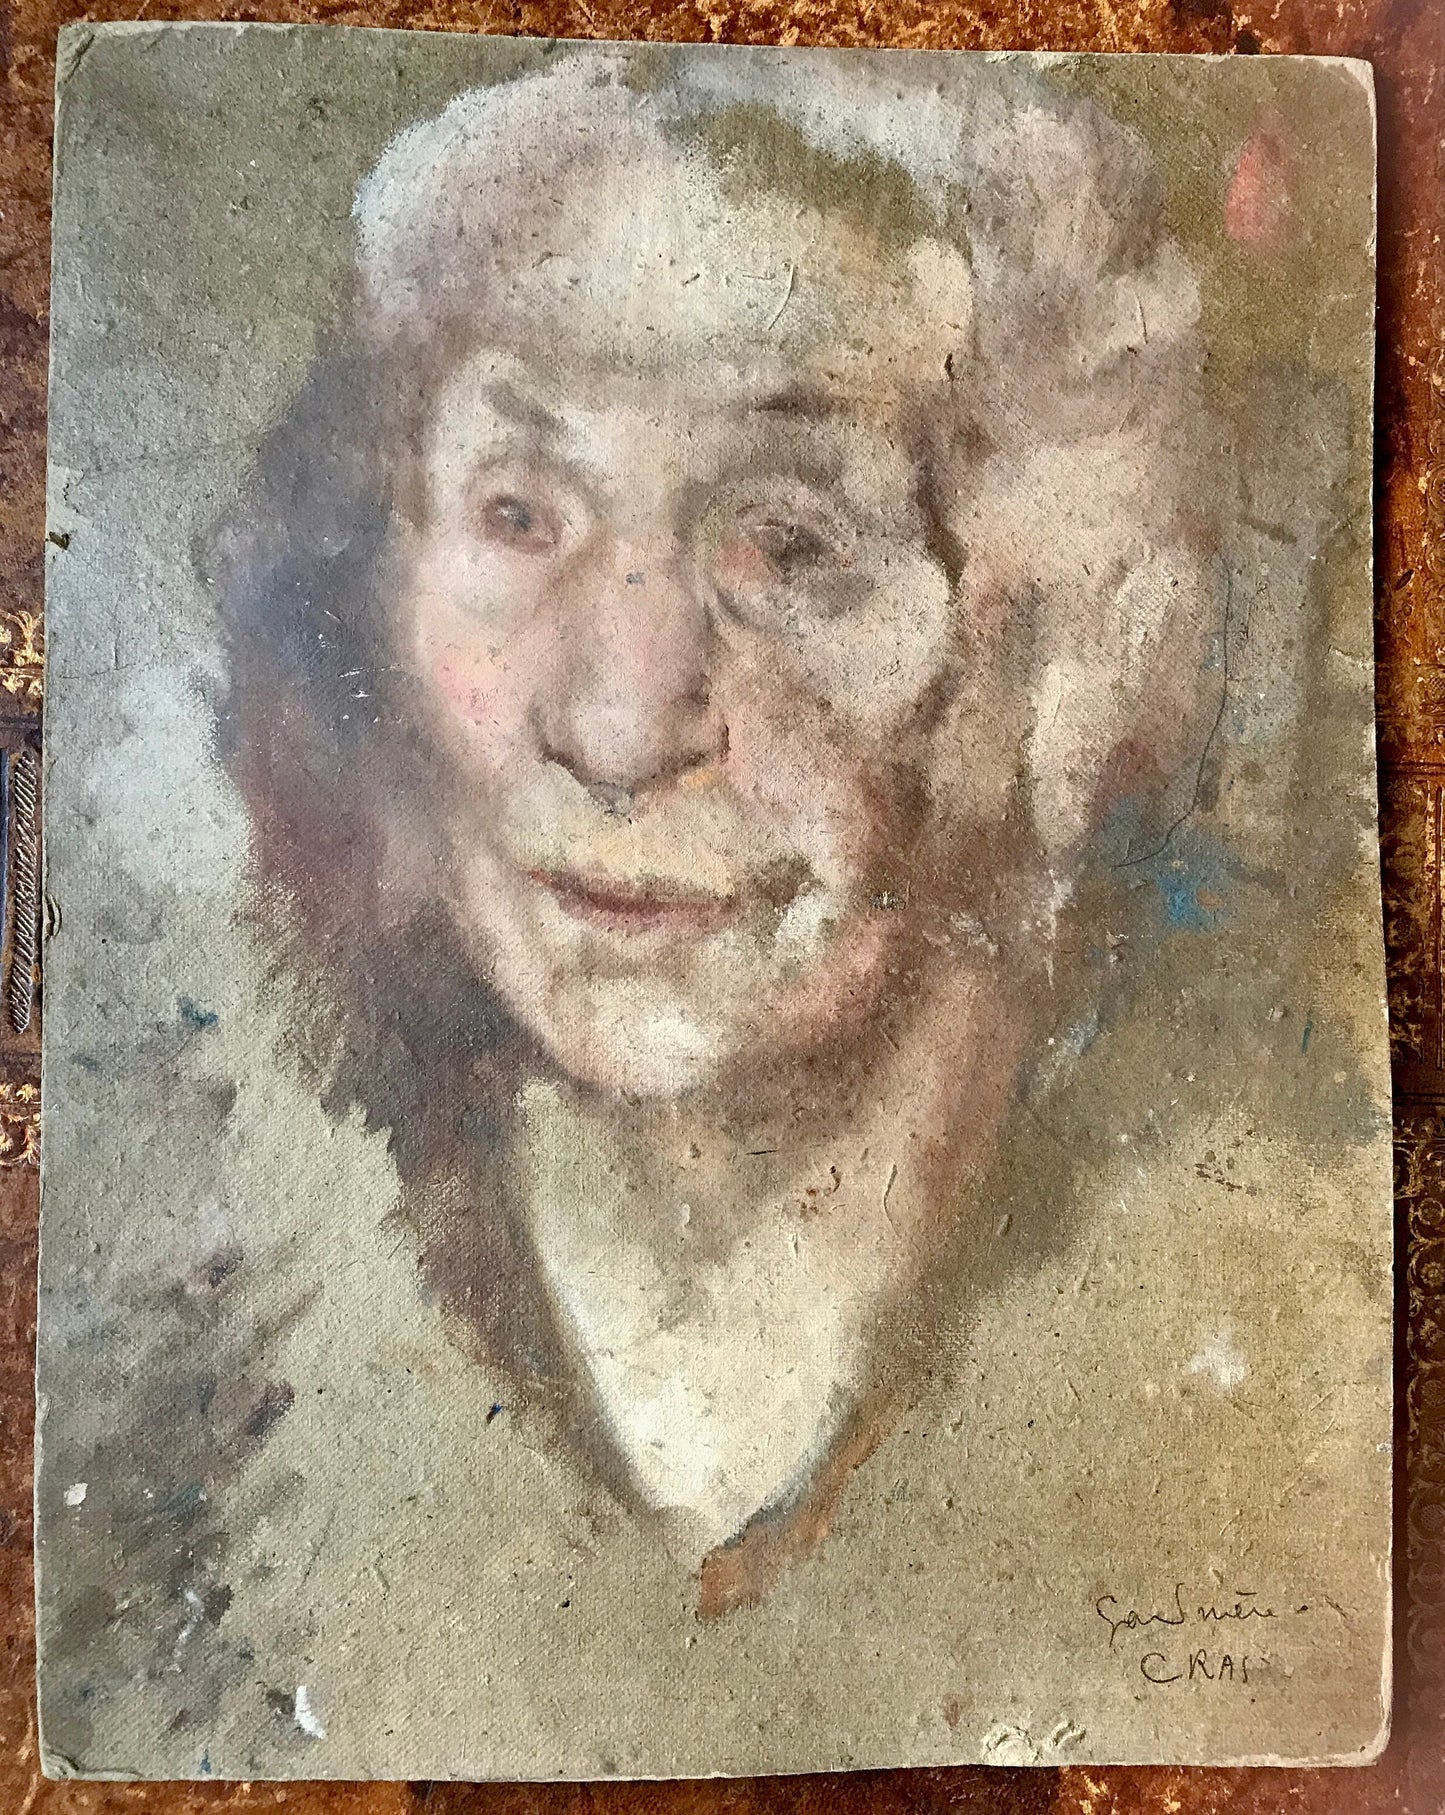 Two Portraits by Monique Cras. One of her grandmother and one of her uncle. Oil on board. 38.5 x 28 and 34.5 x 27 cms.